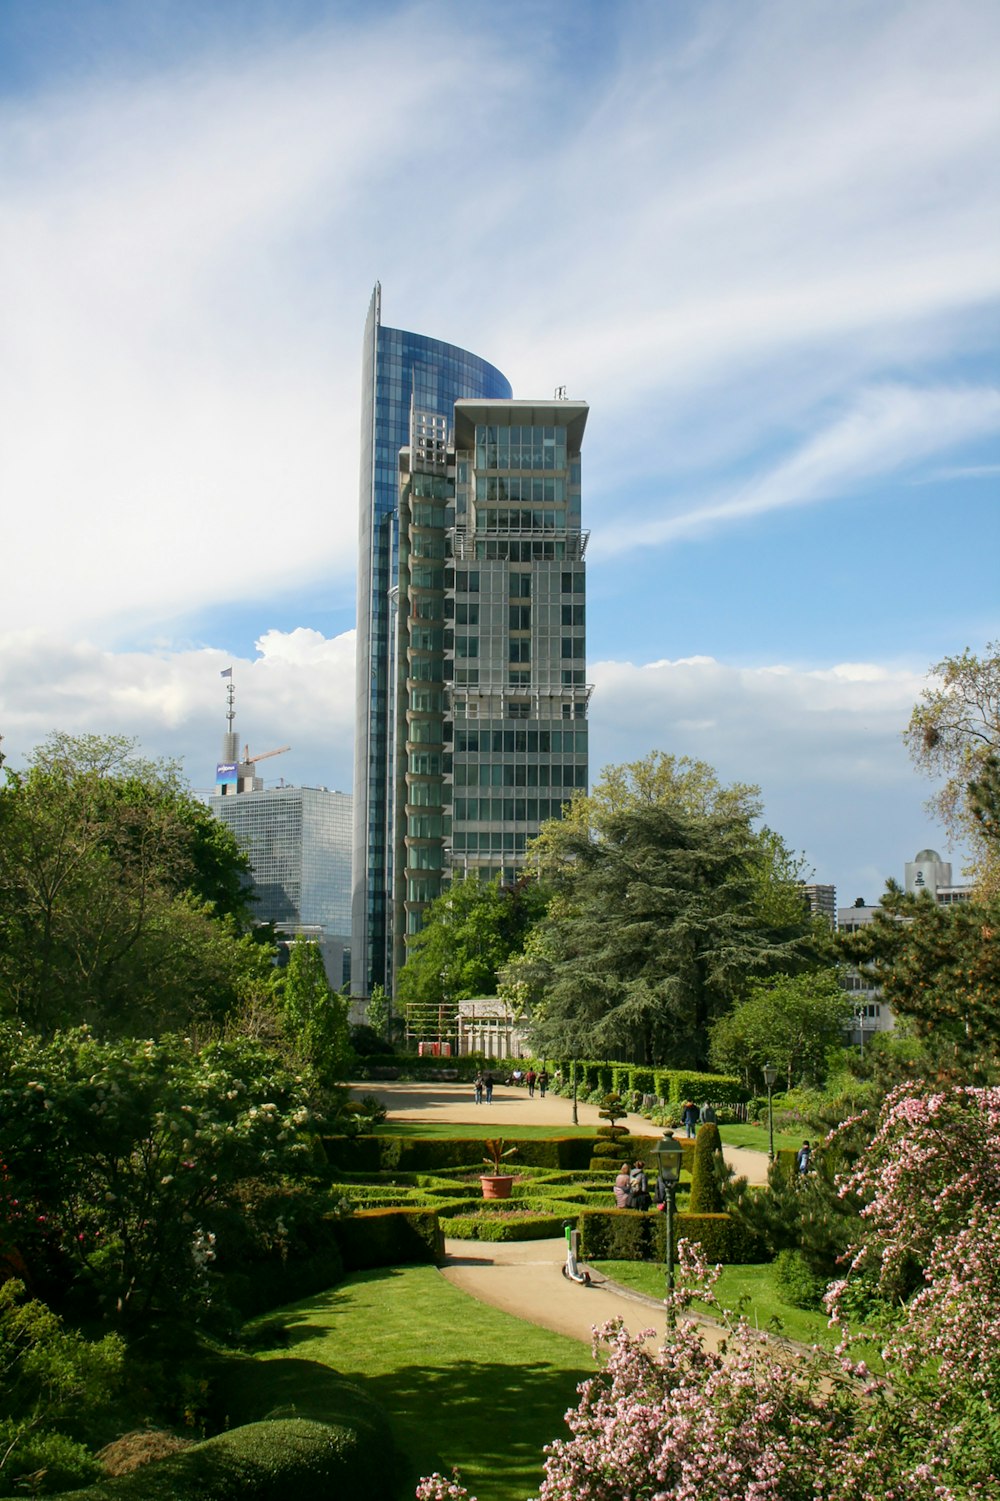 a view of a park with a tall building in the background